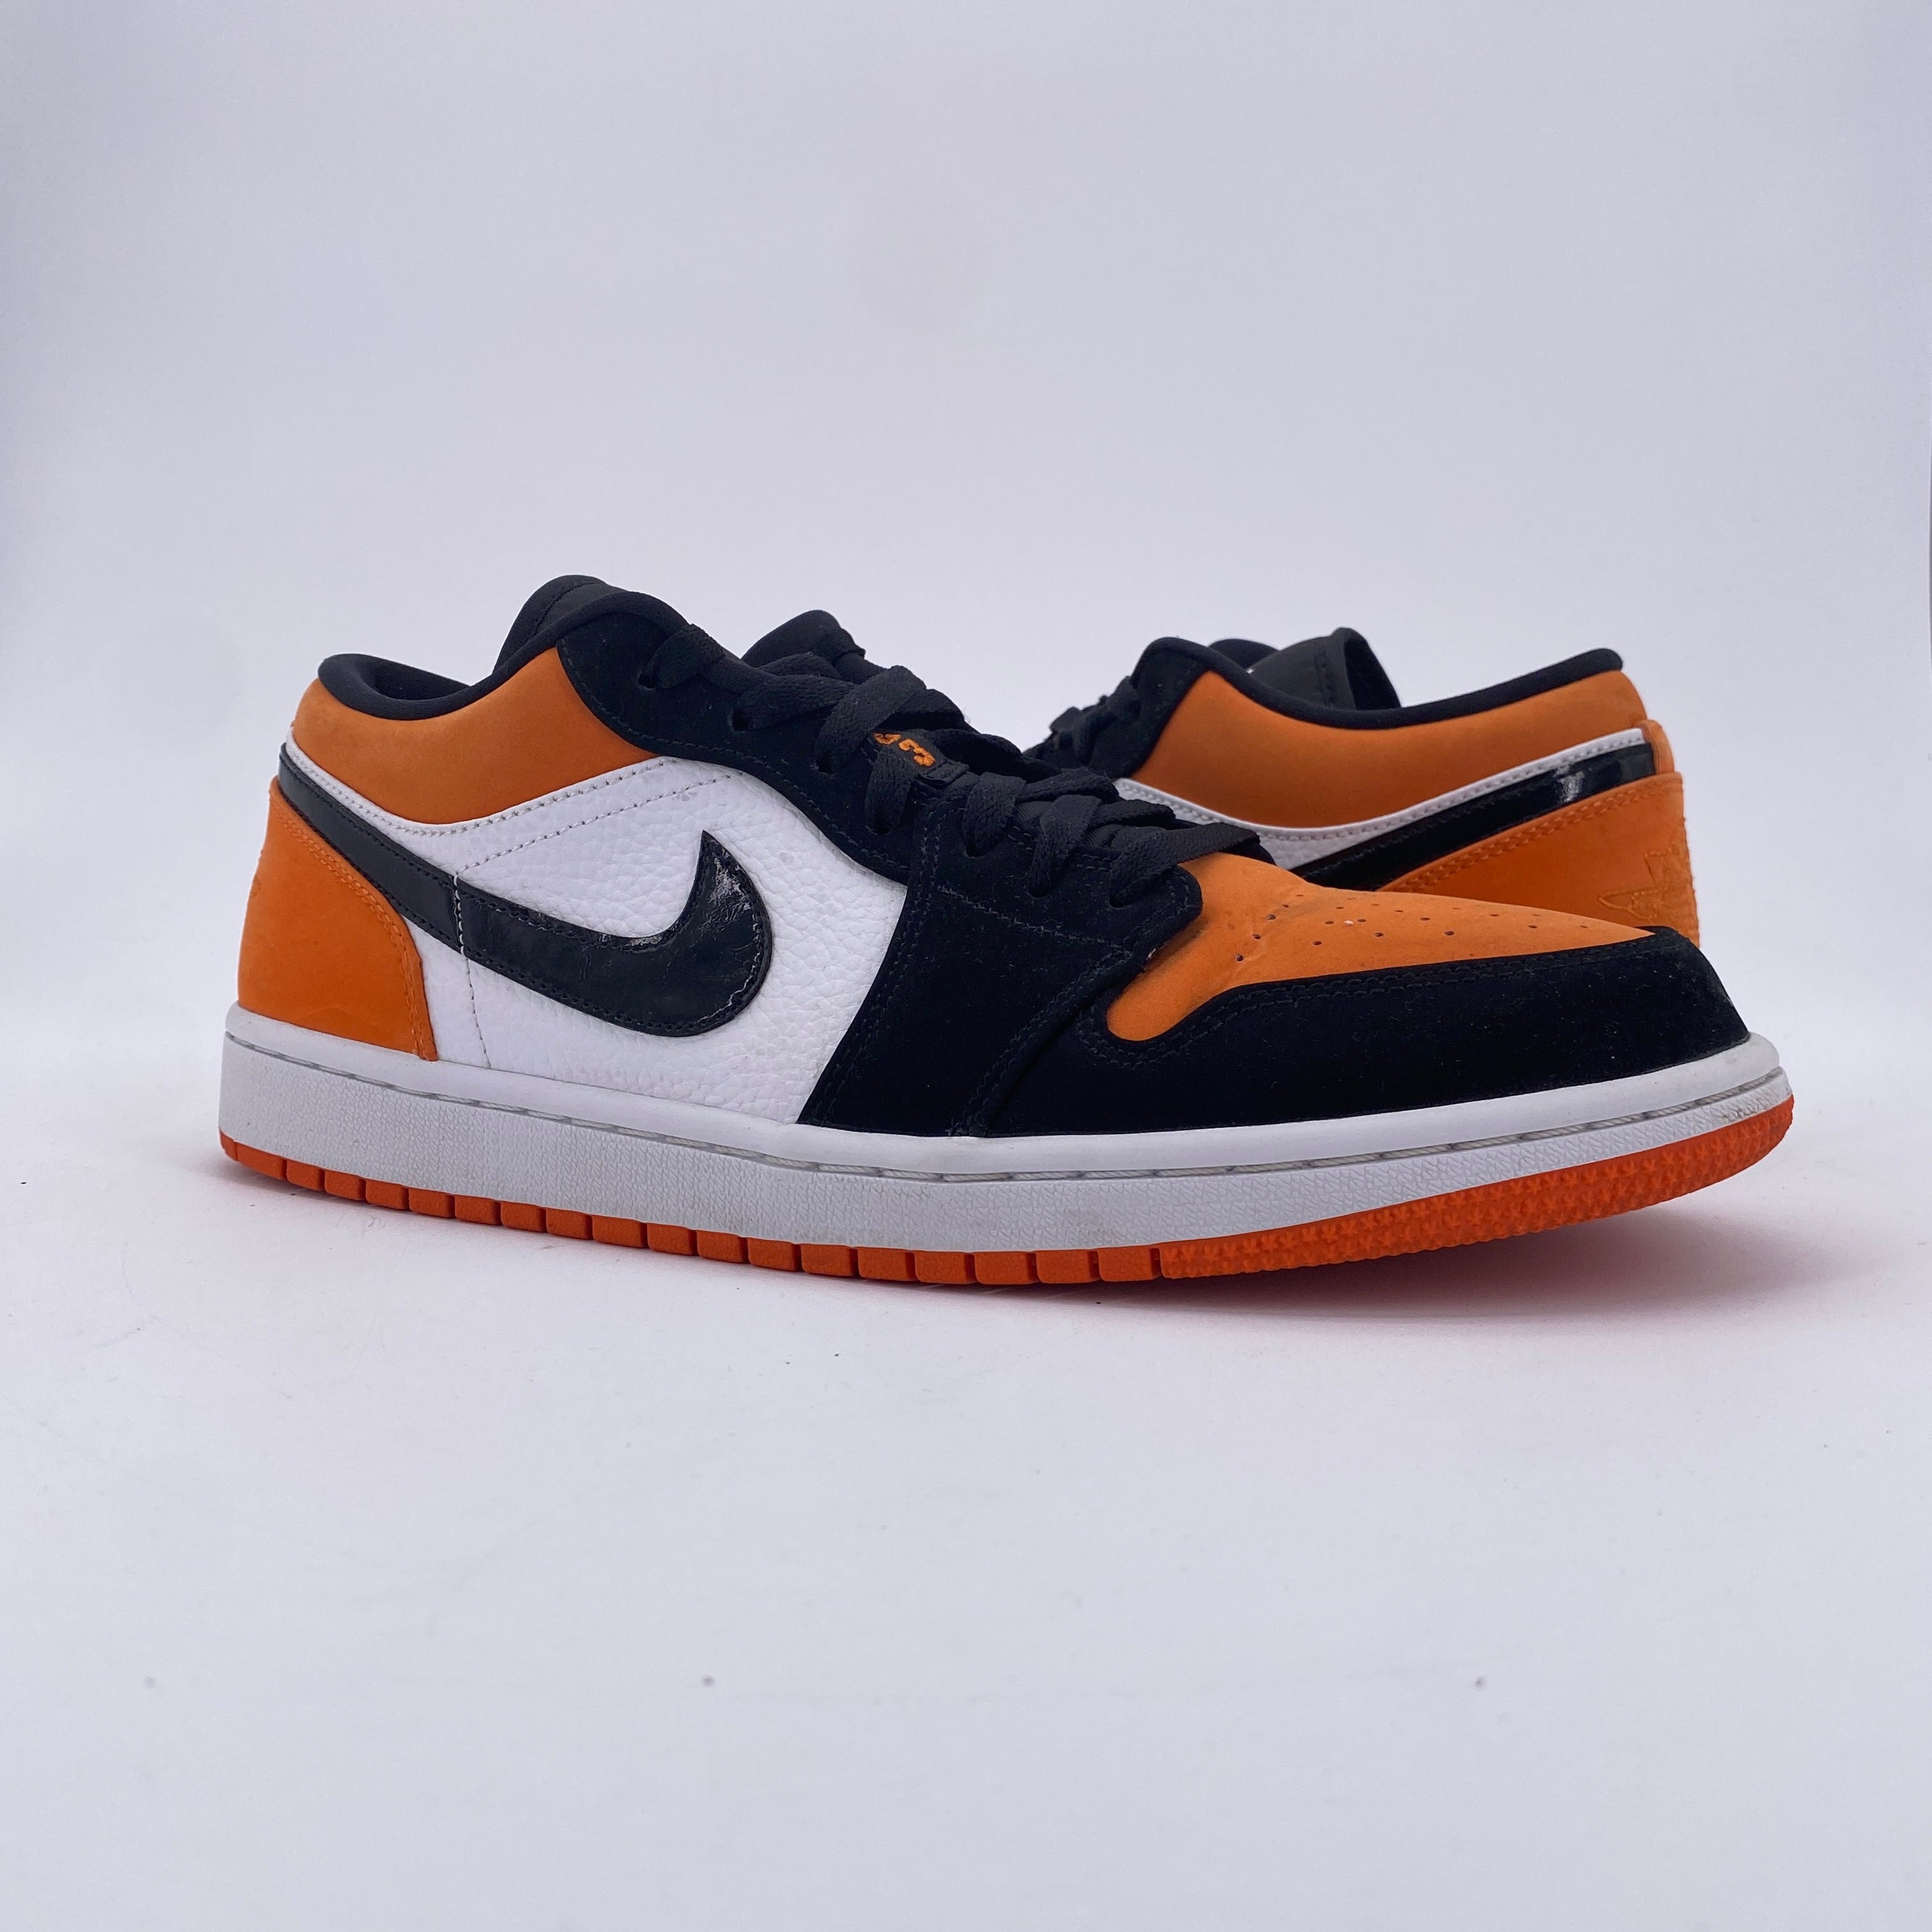 Air Jordan 1 Low &quot;Shattered Backboard&quot; 2021 Used Size 11.5